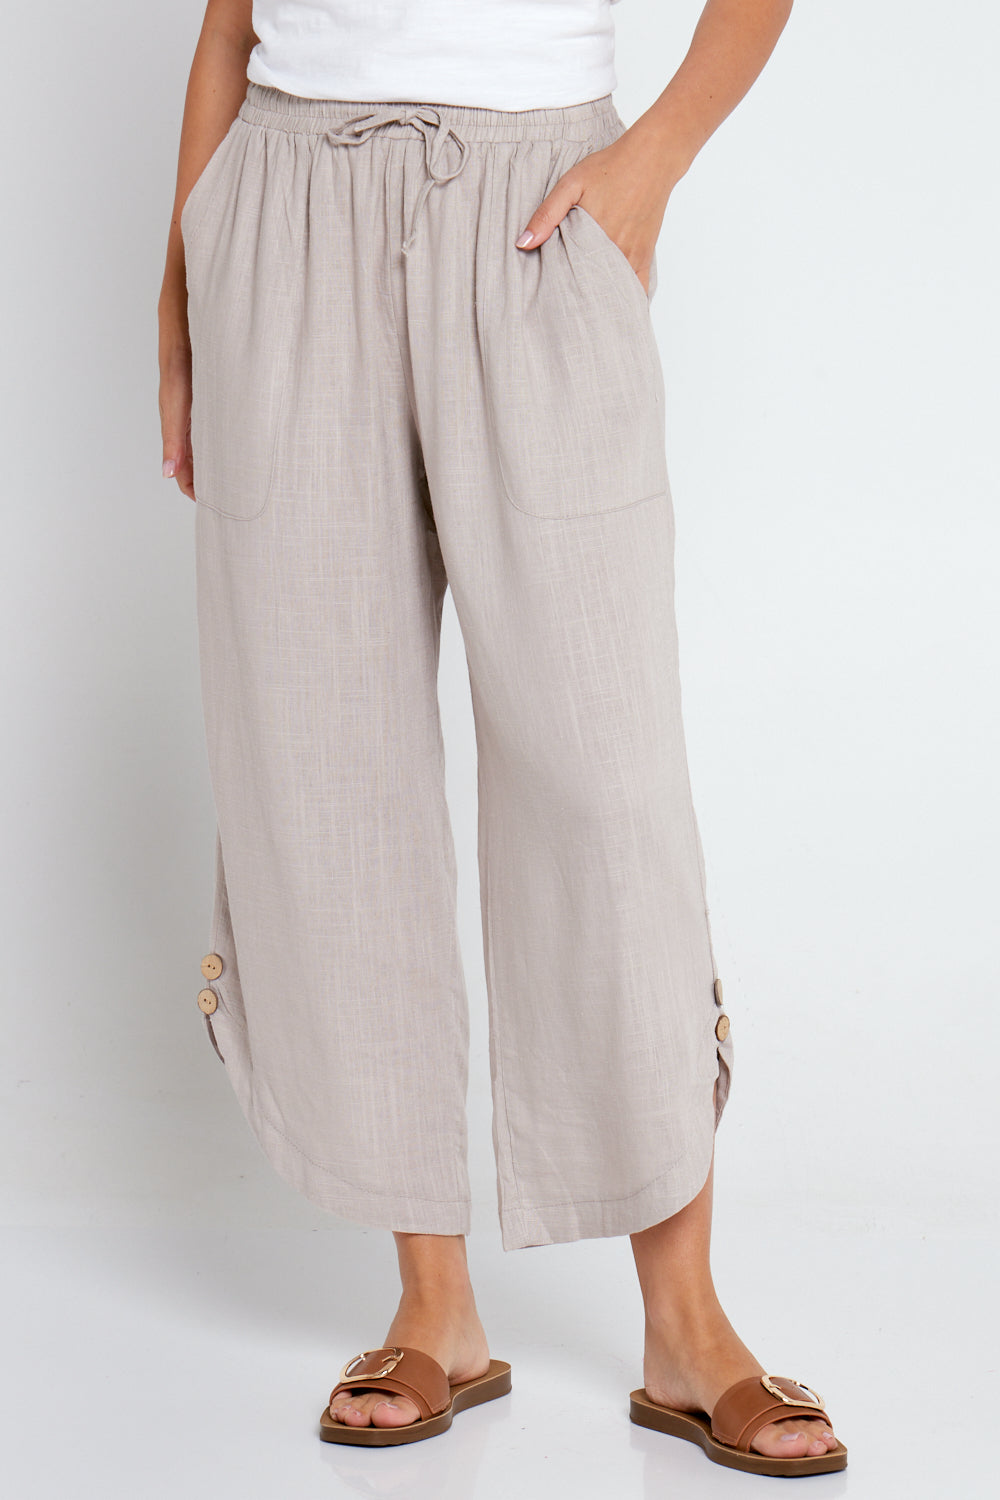 So Comfy Wide Leg Pant Cropped Length - Mustard